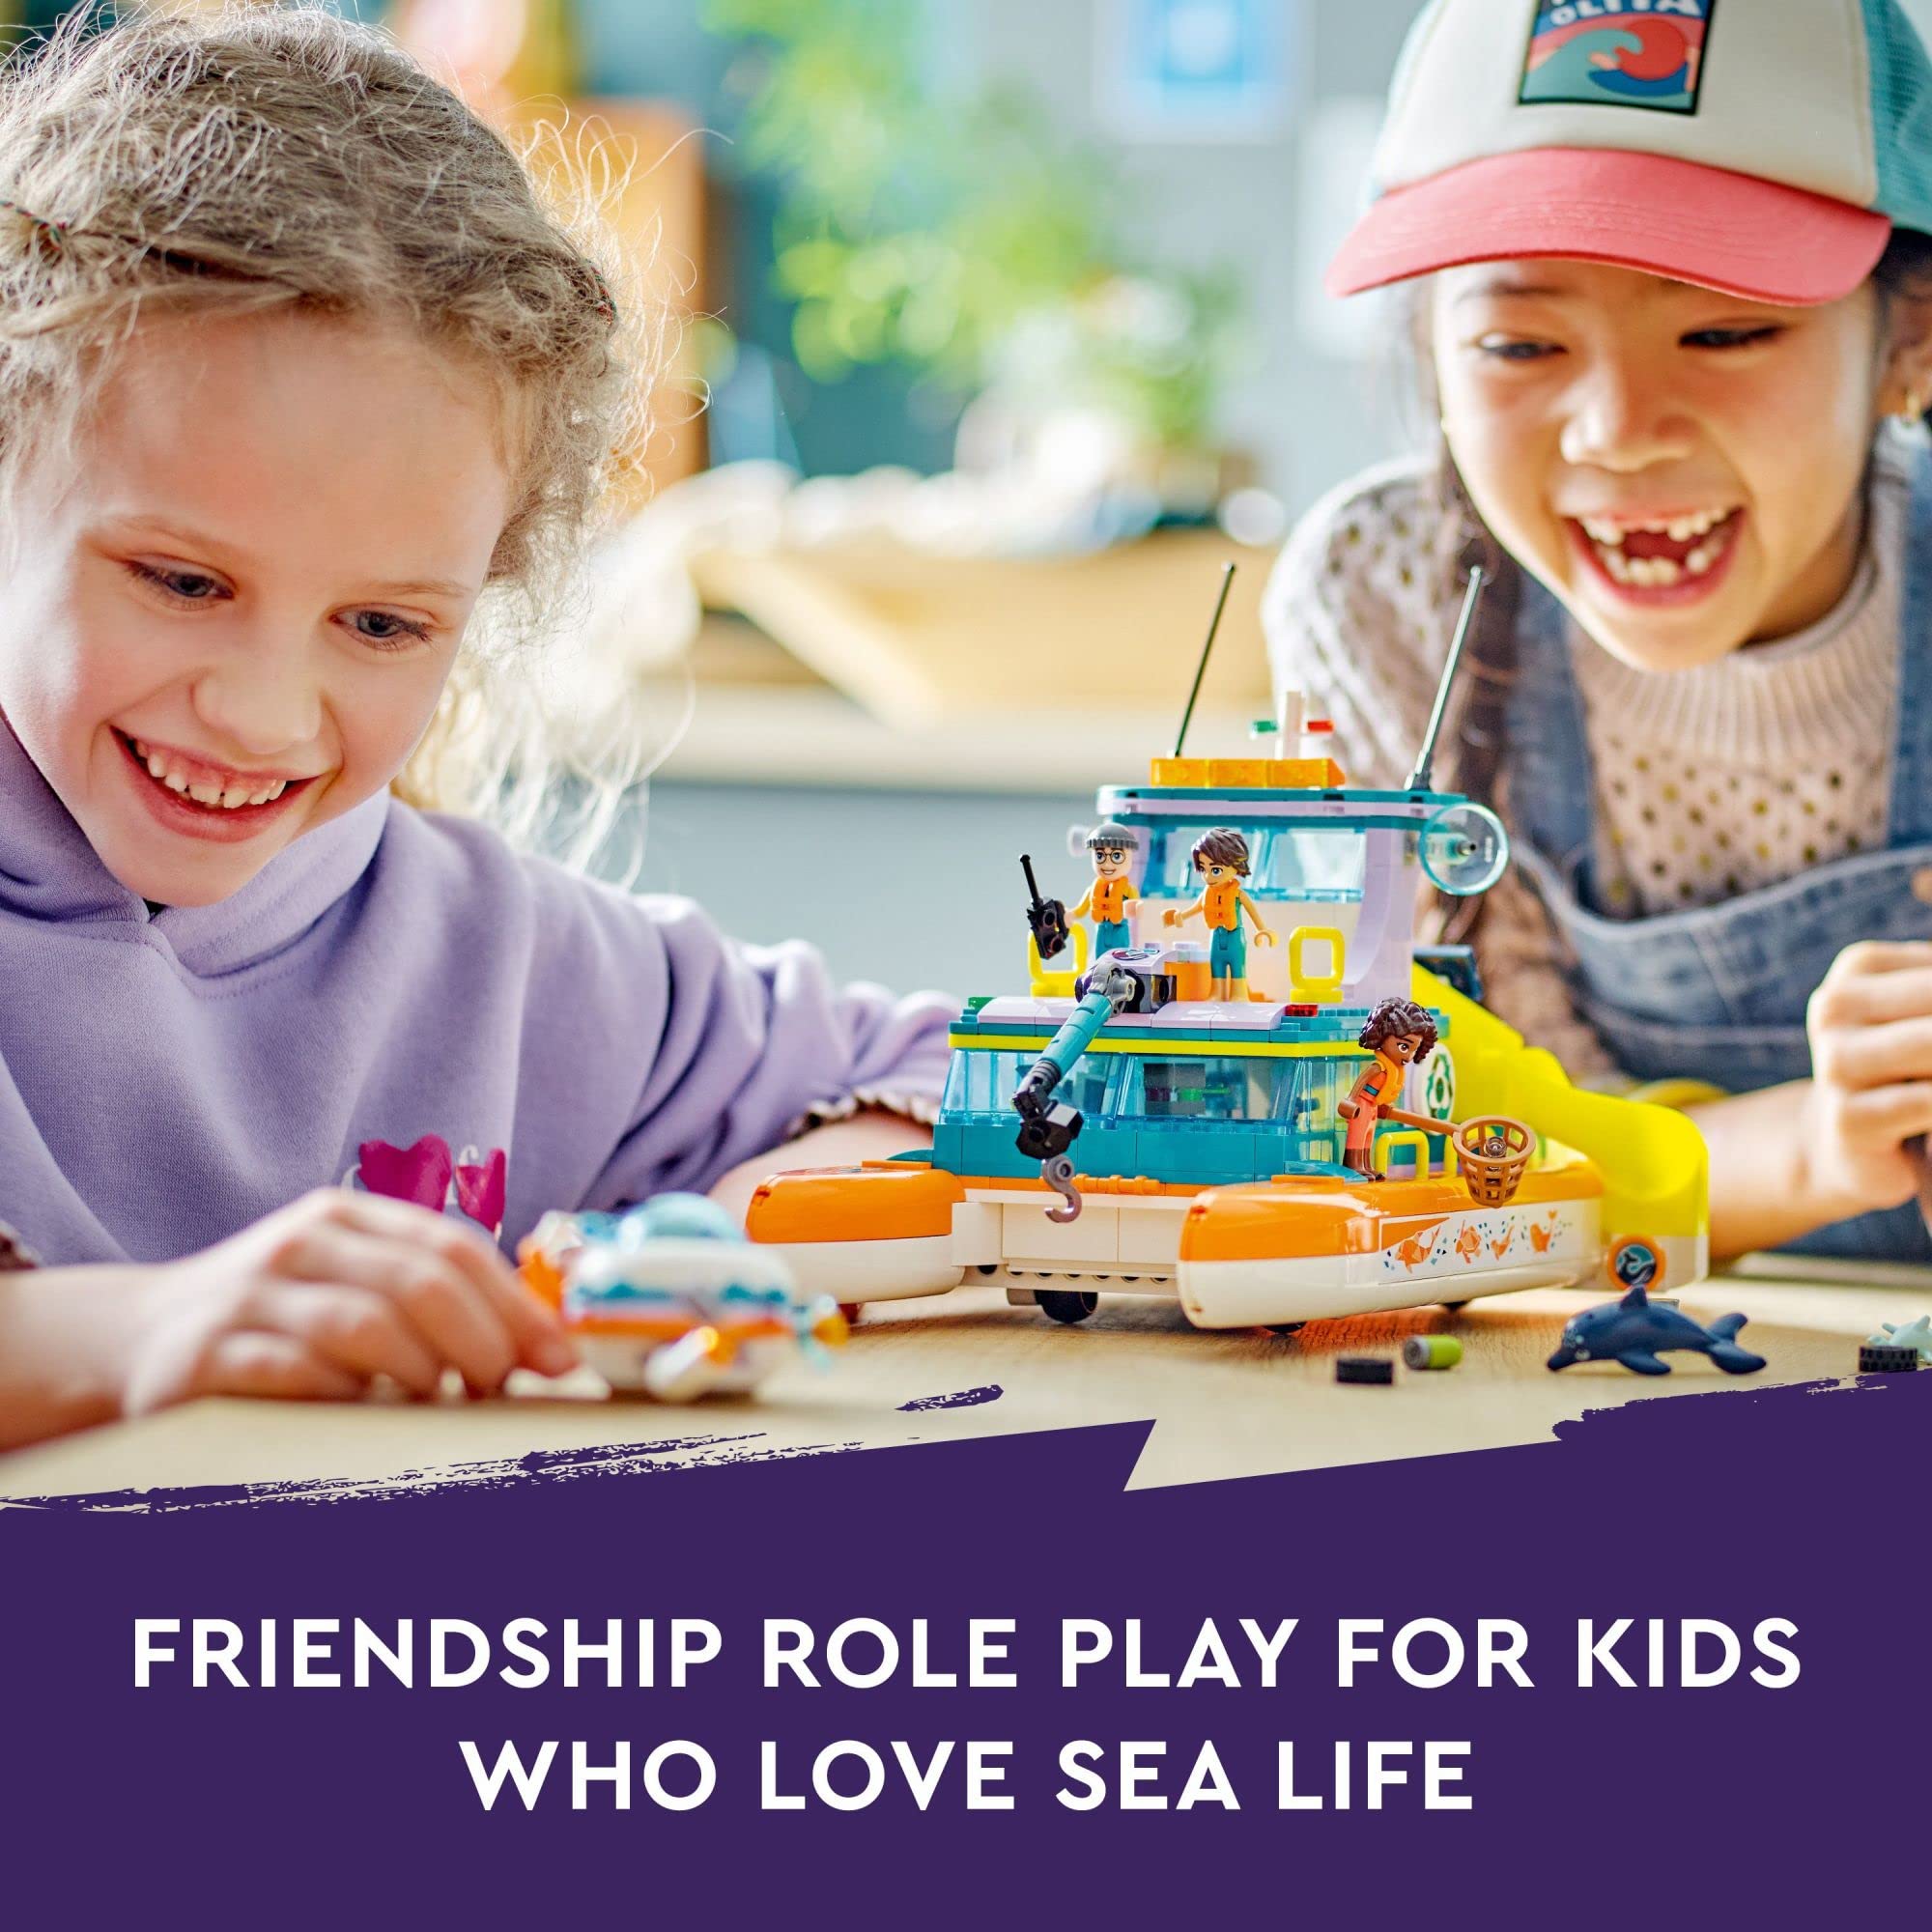 LEGO Friends Sea Rescue Boat 41734 Building Toy Set for Boys & Girls Ages 7+ Who Love The Sea, Includes 4 Mini-Dolls, a Submarine, Baby Dolphin and Toy Accessories for Ocean Life Role Play